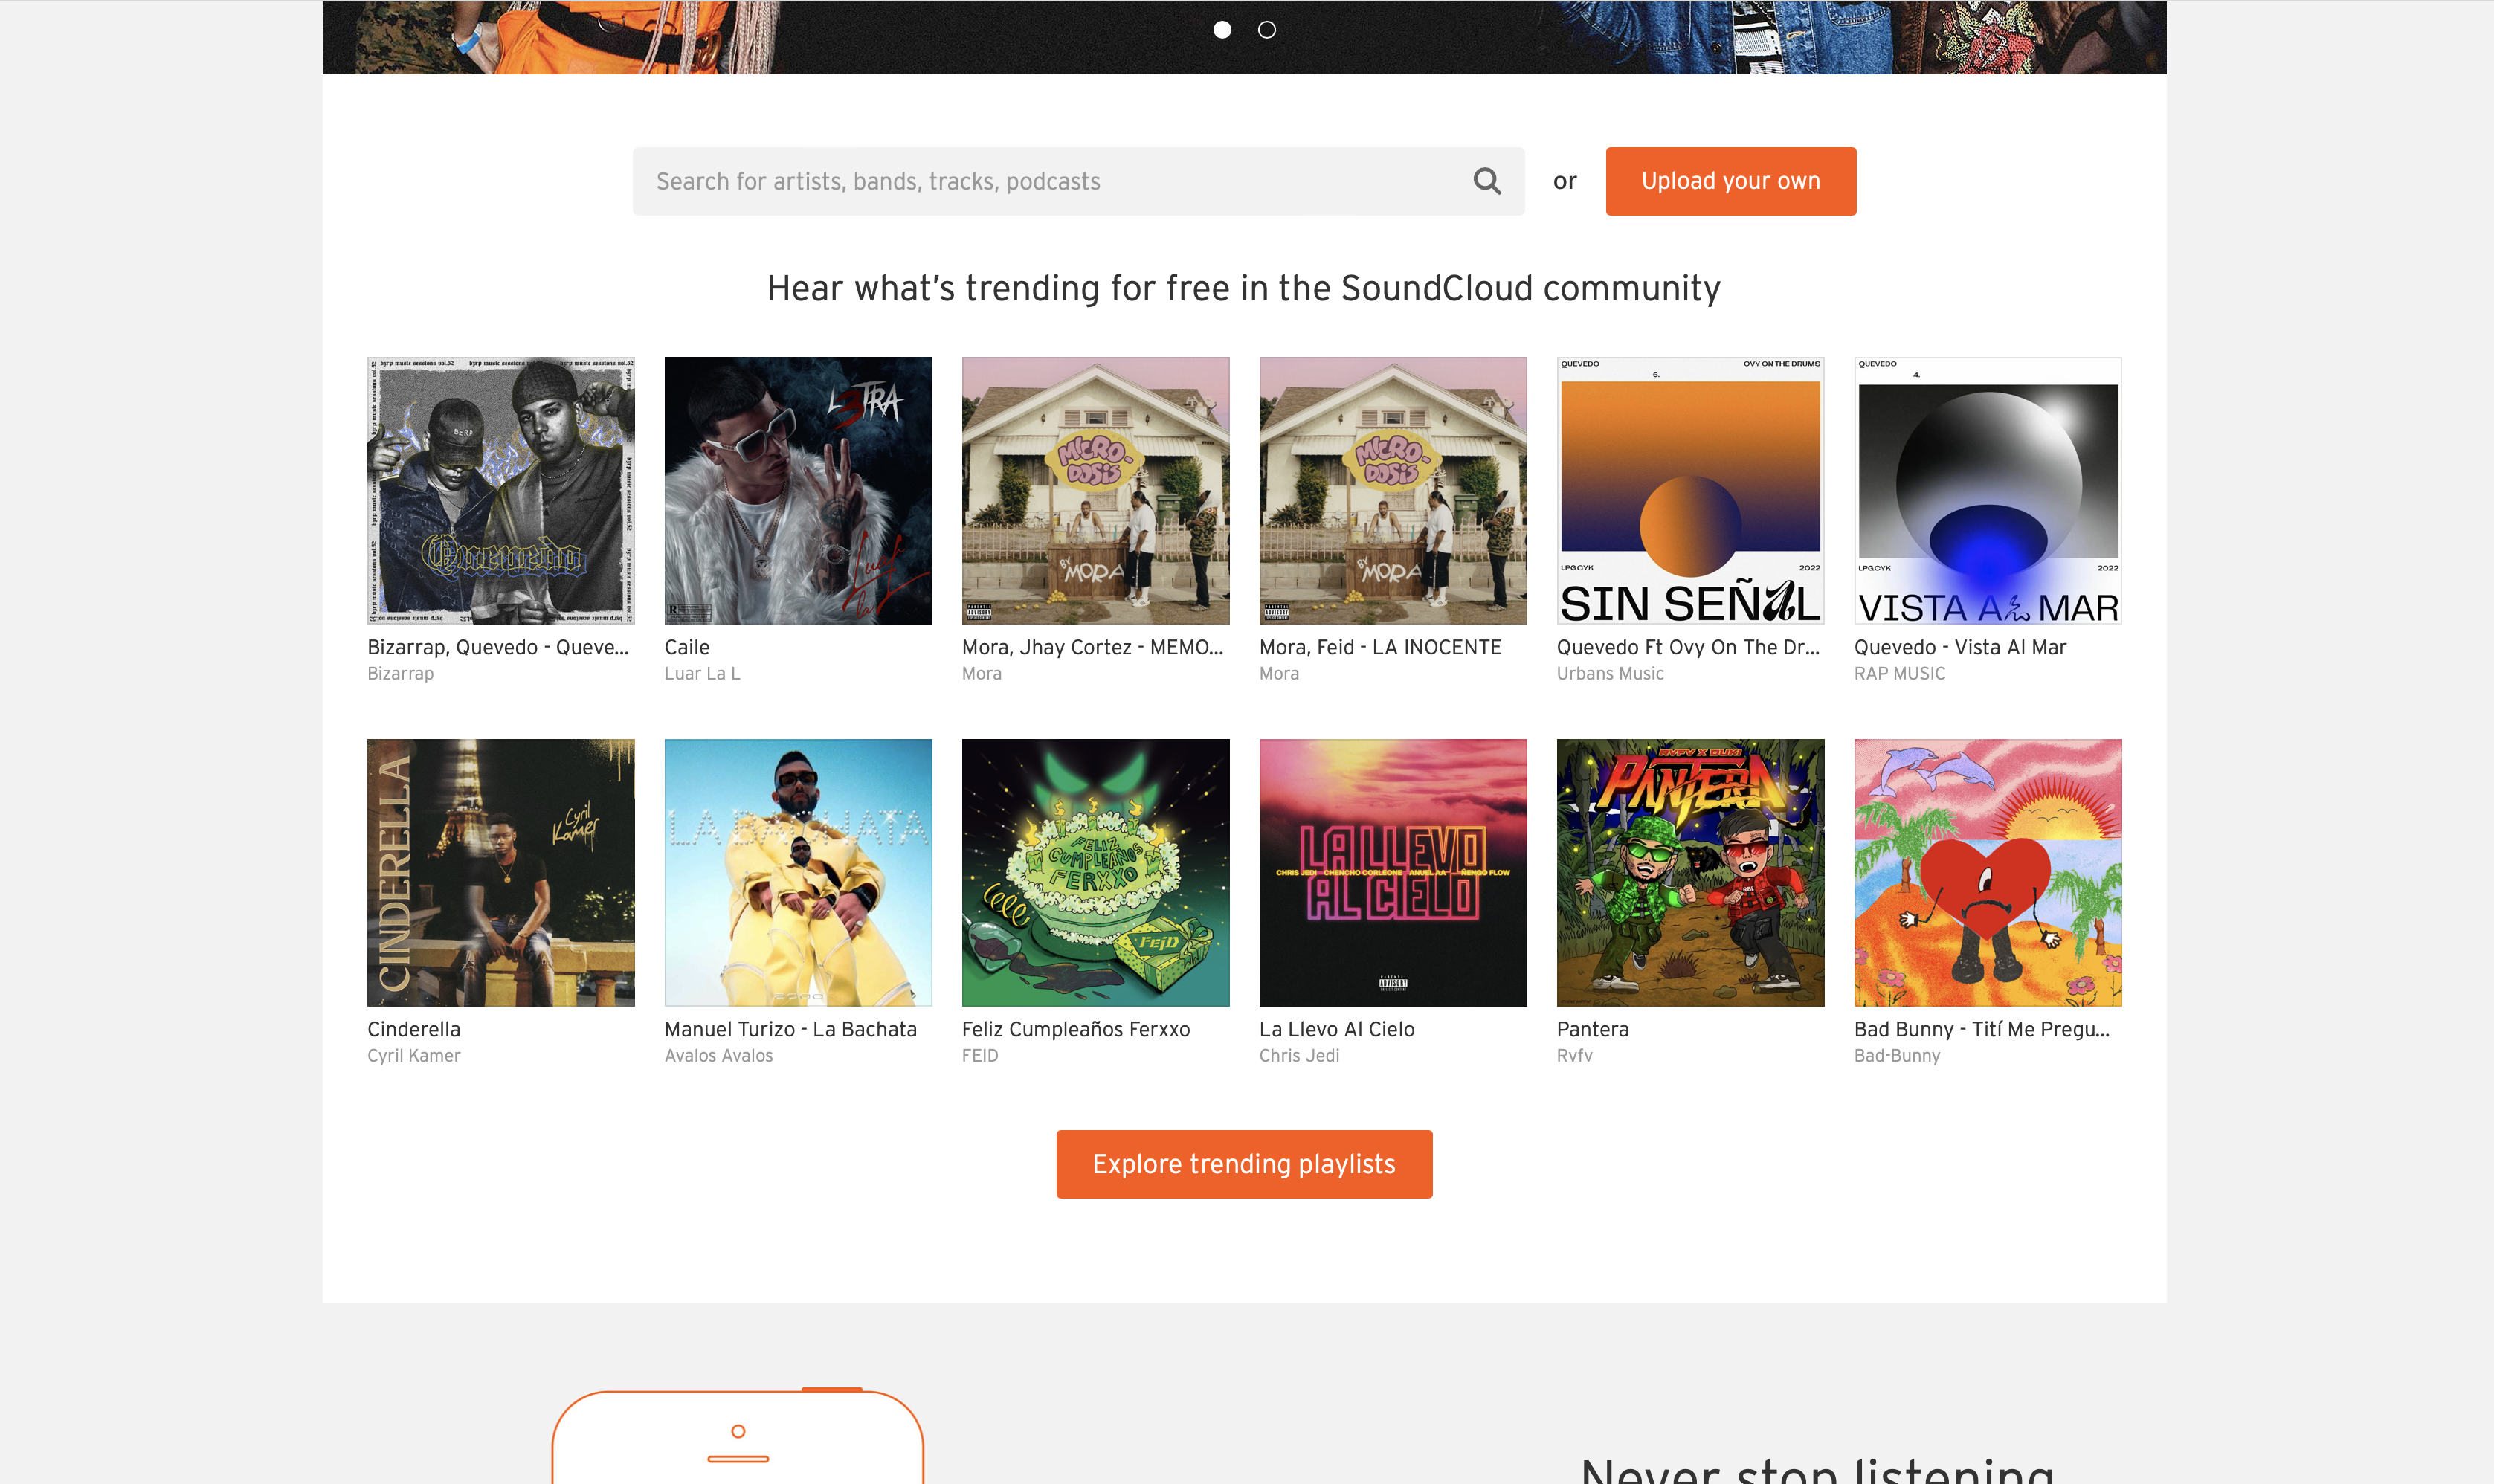 How To Download Music In 2022 - An image of the Soundcloud homepage.